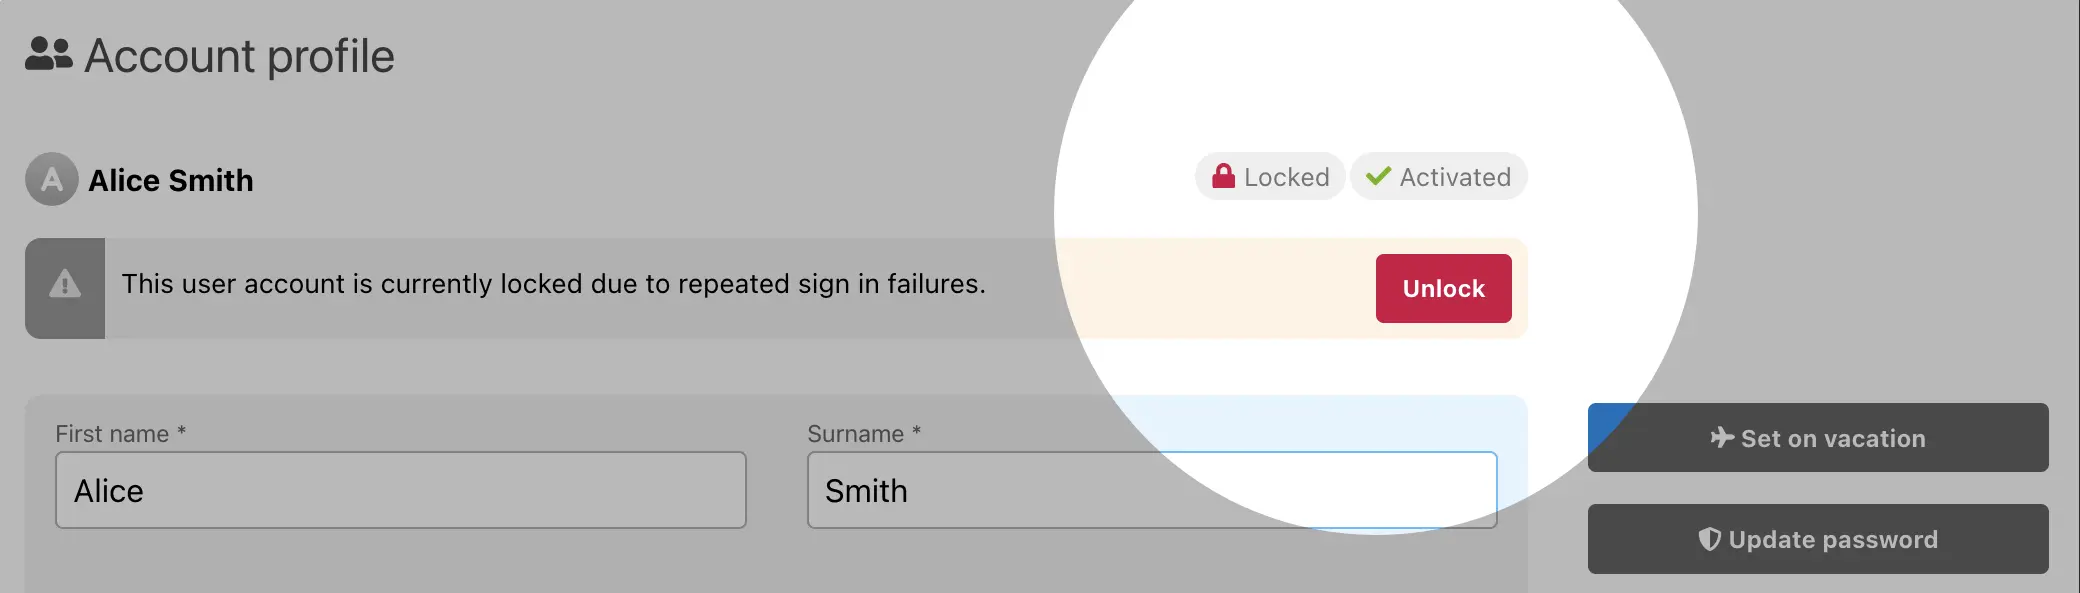 Account profile page – Locked account